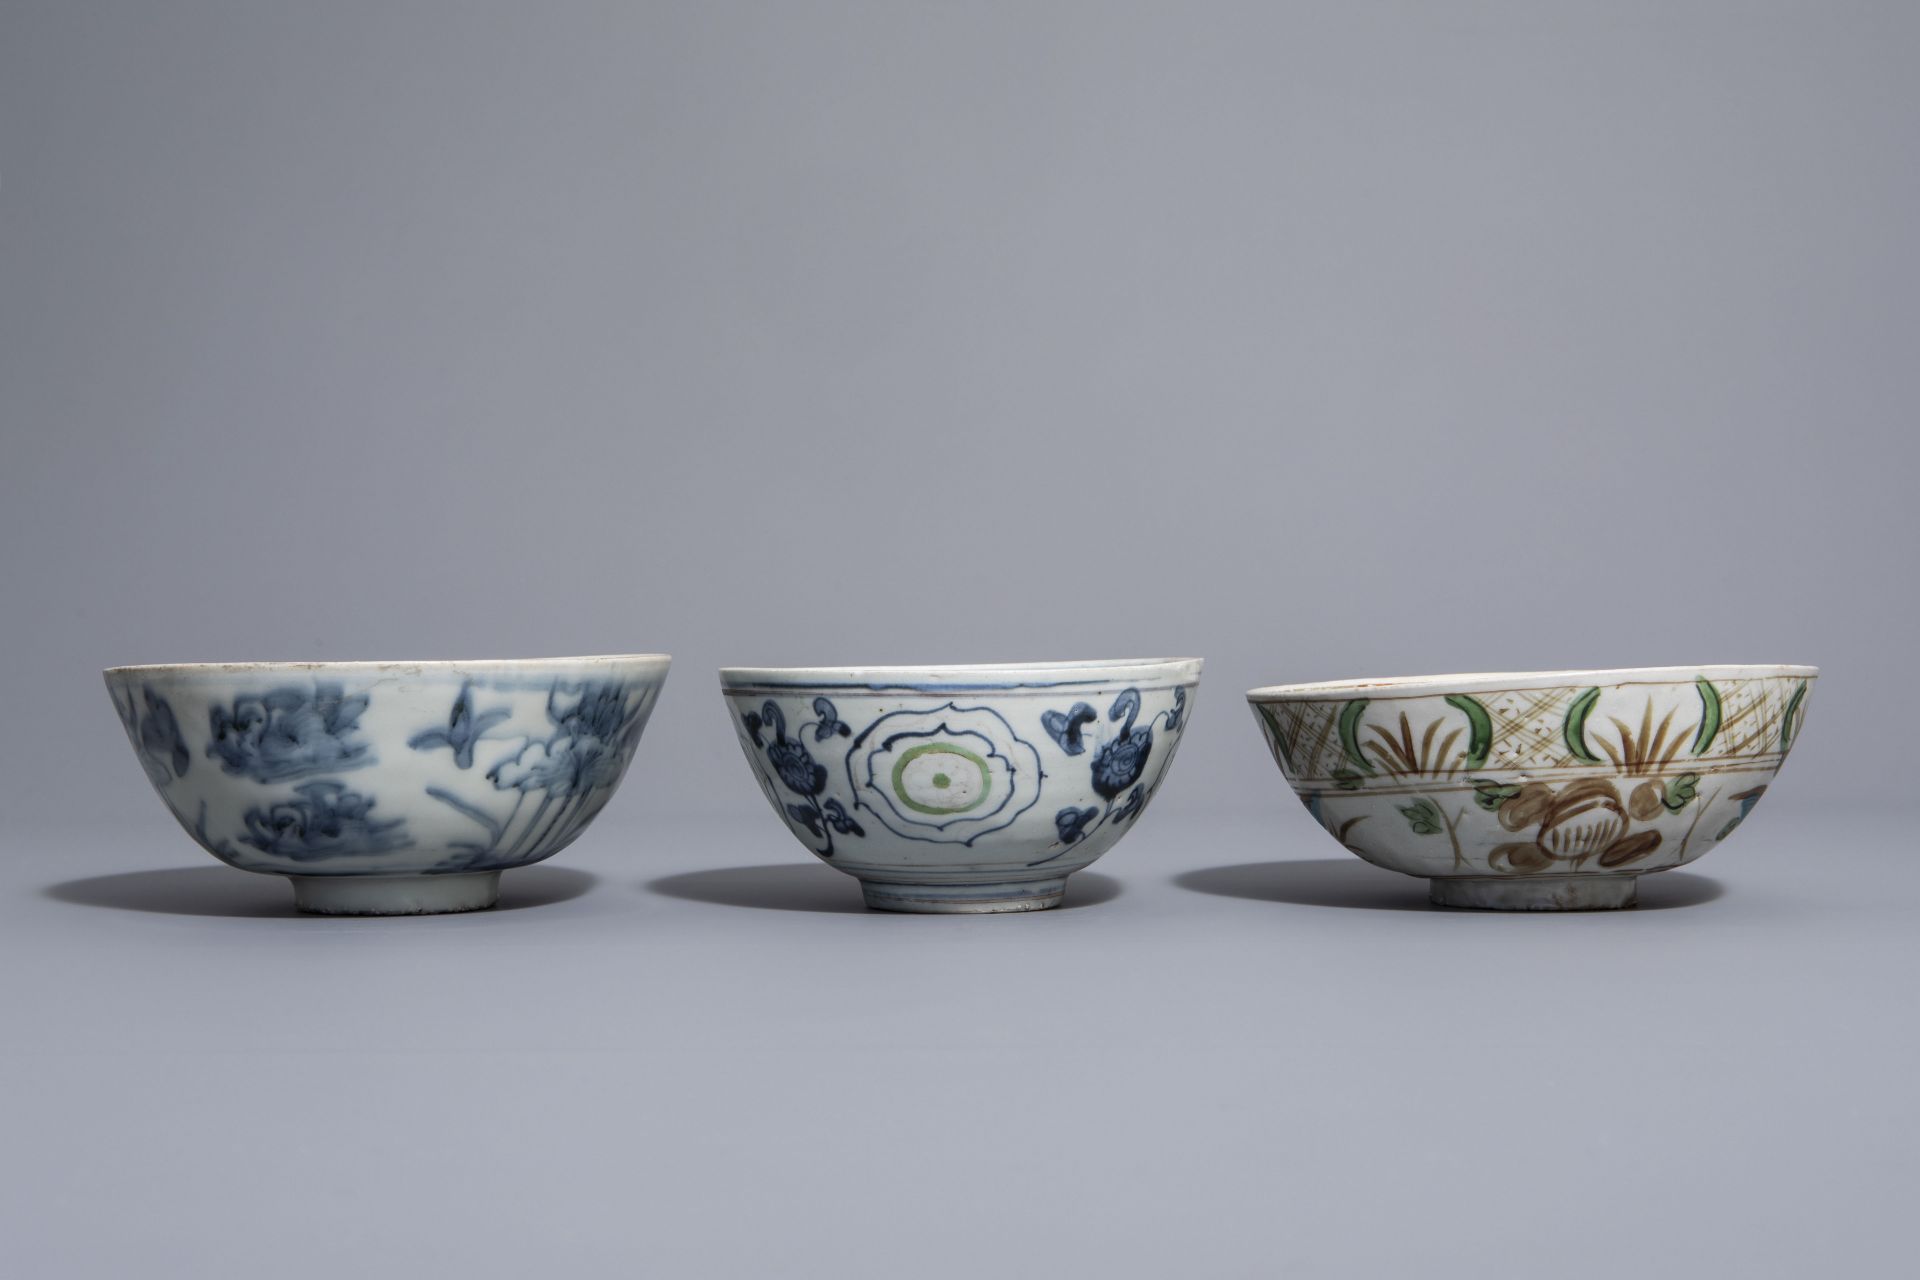 Three Chinese blue, white and polychrome Swatow bowls with different designs, 17th C. - Image 5 of 7